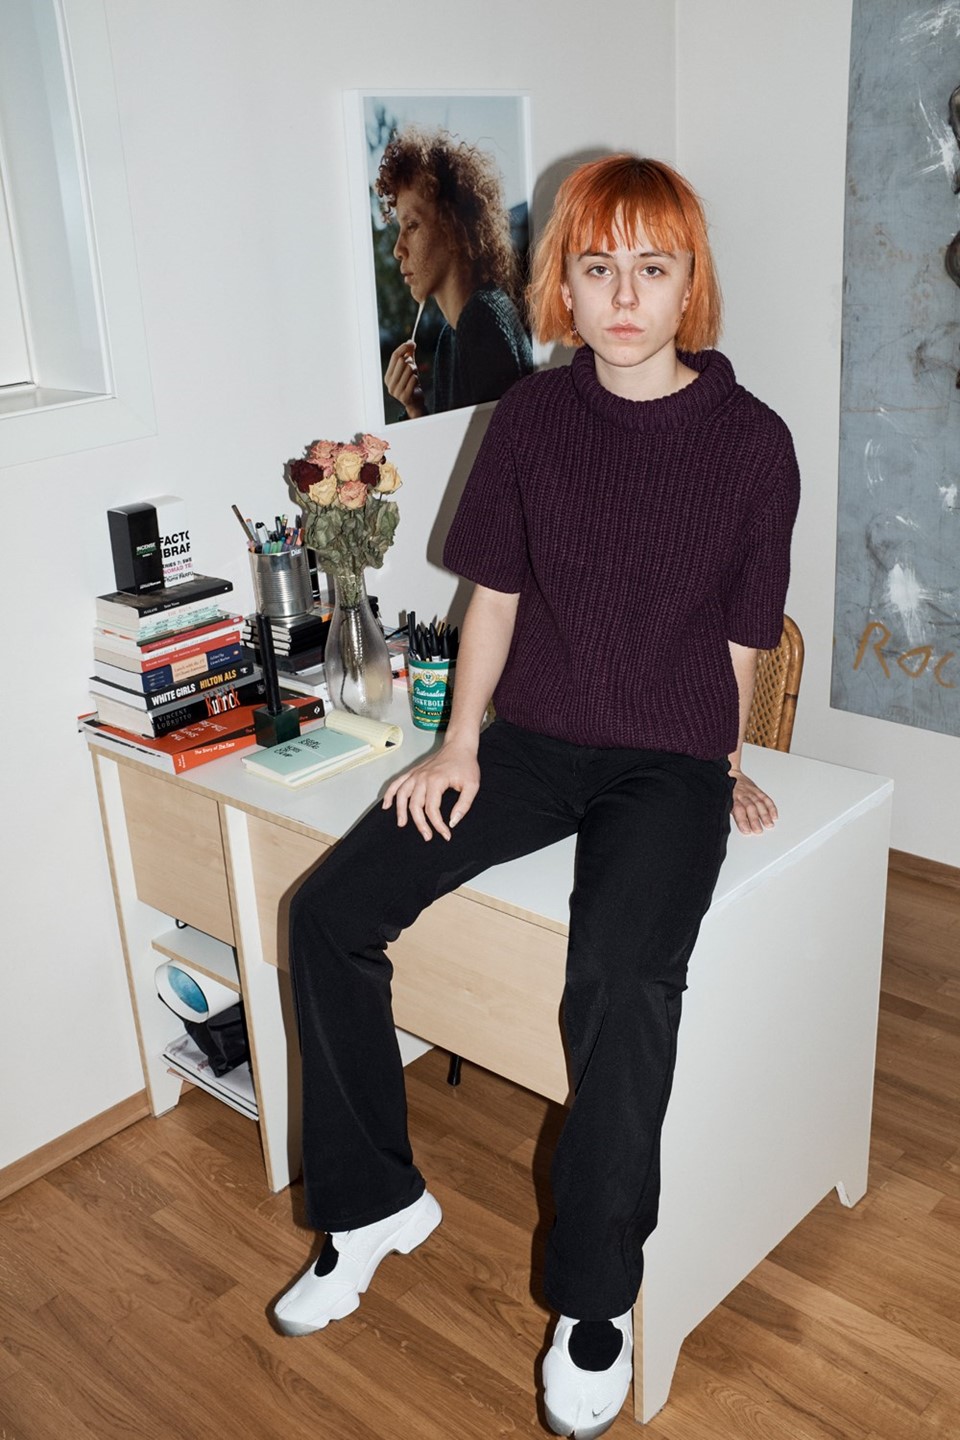 Bourgeois and Fashion: Elise By Olsen in Conversation with Charlie